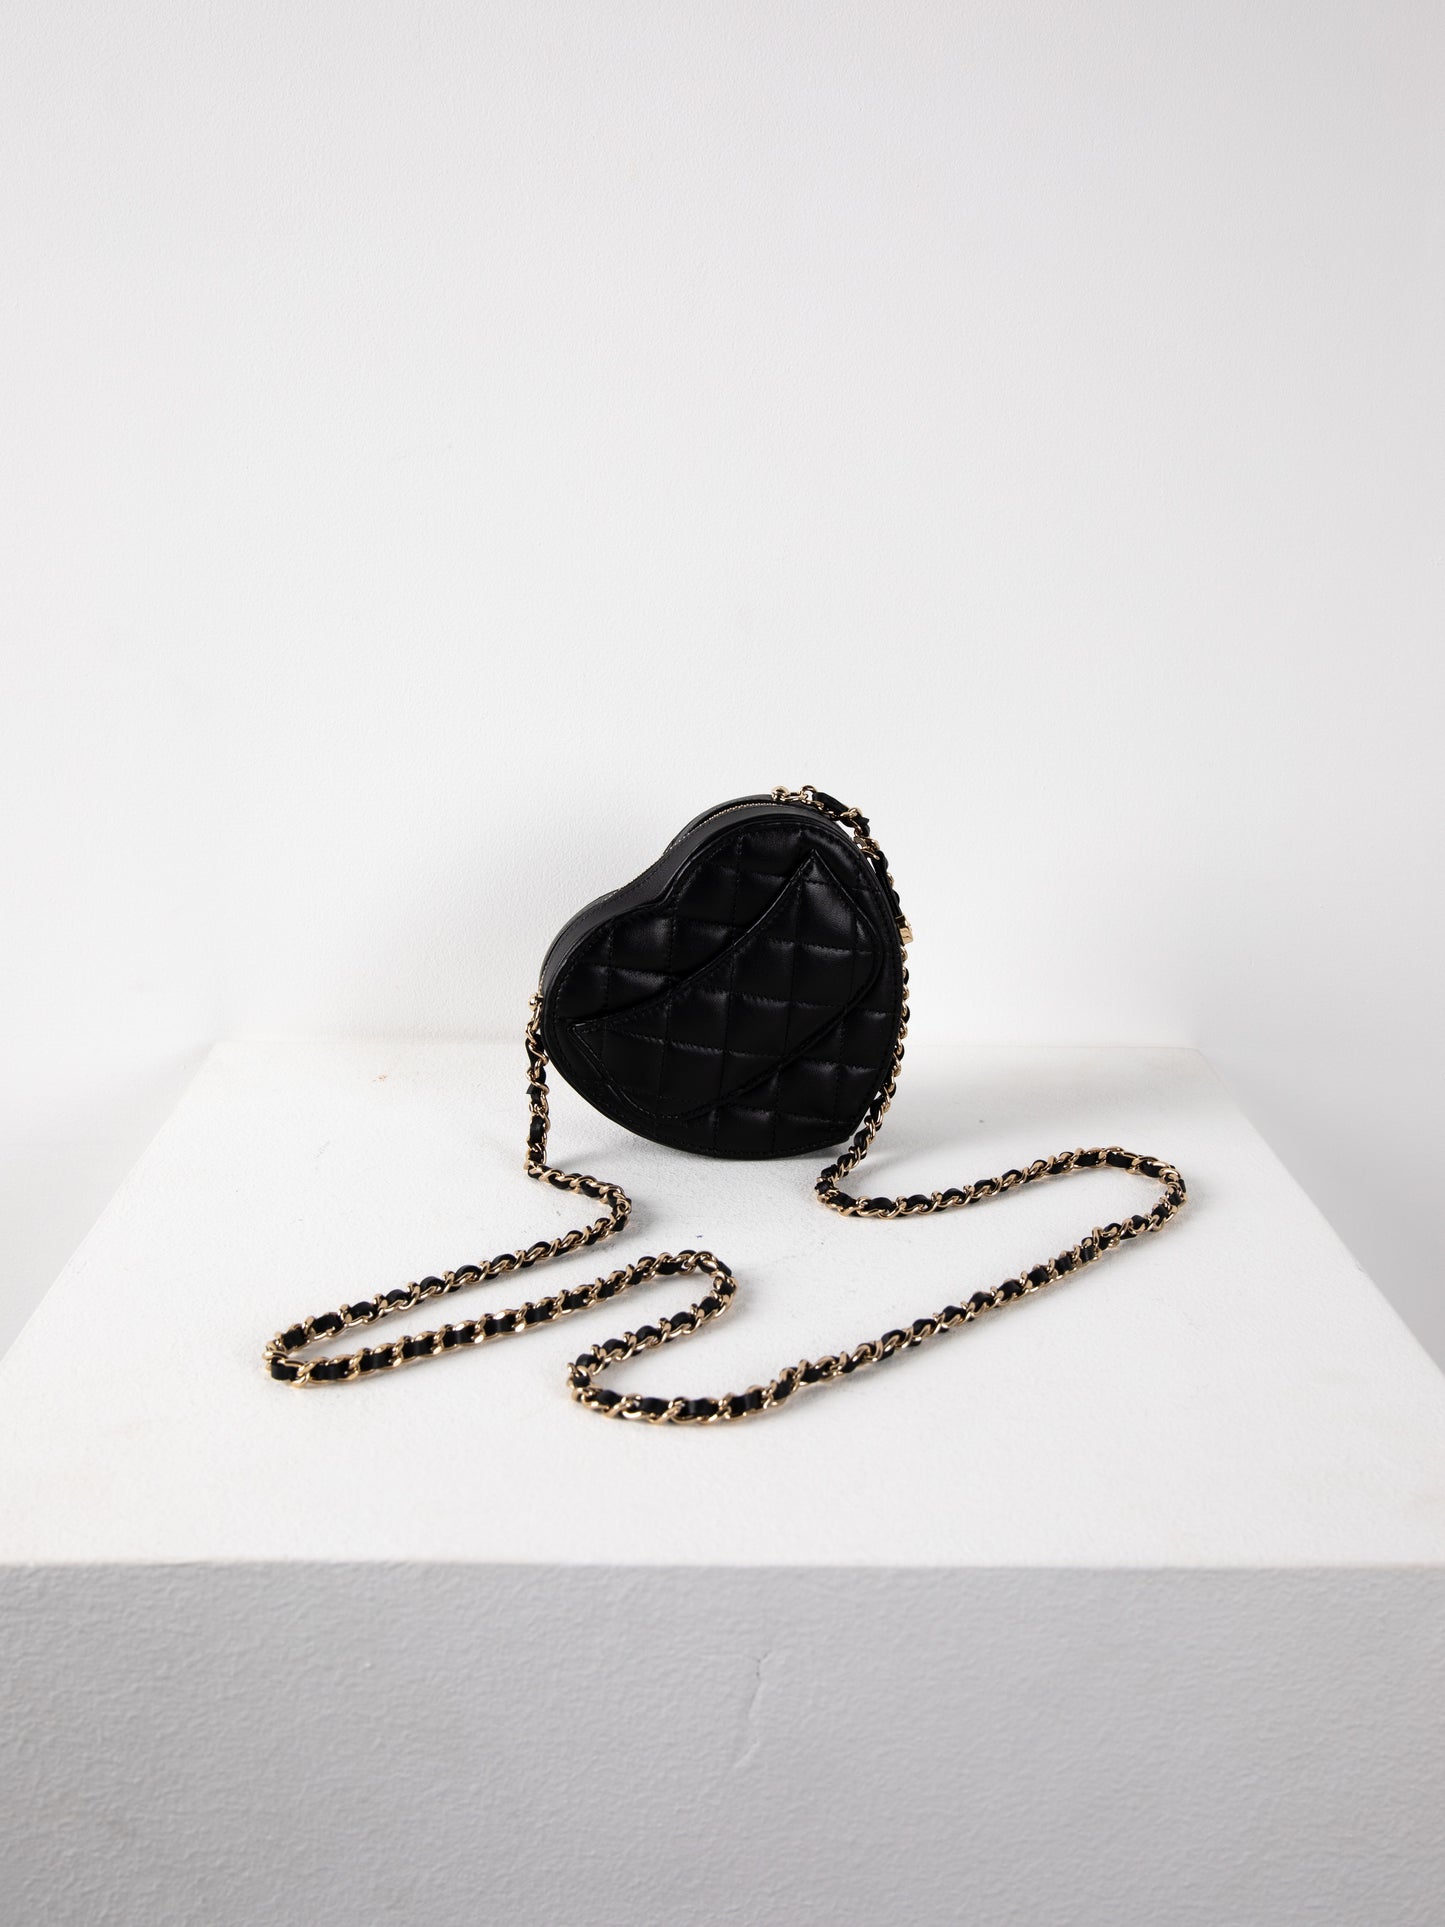 Chanel Black Heart Bag in Small Size